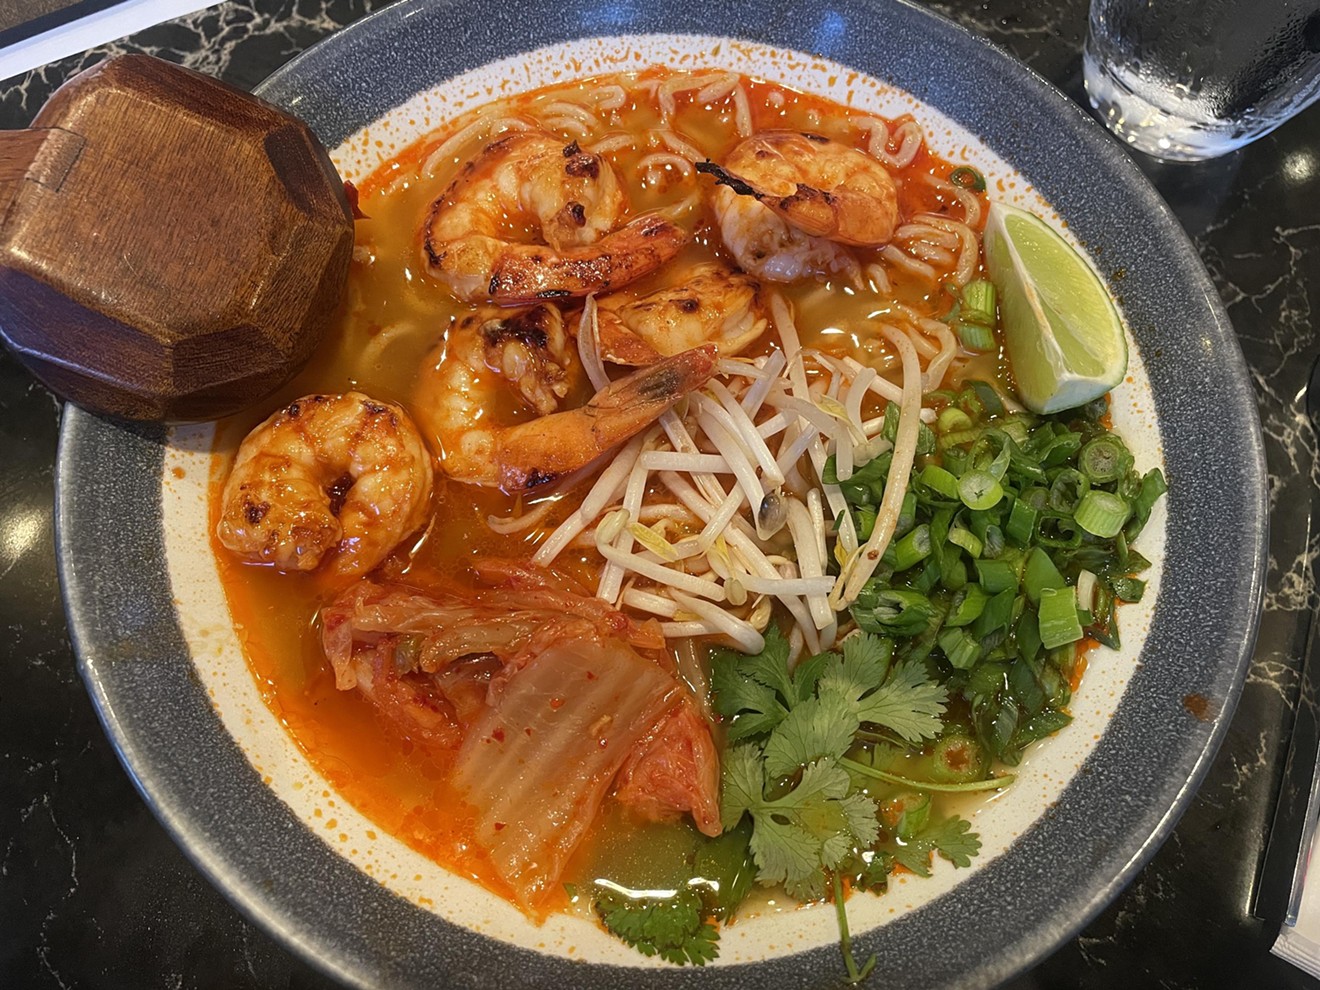 The chili shrimp and kimchi ramen at Wagamama is good for a major chain, but a bit steep at $18.